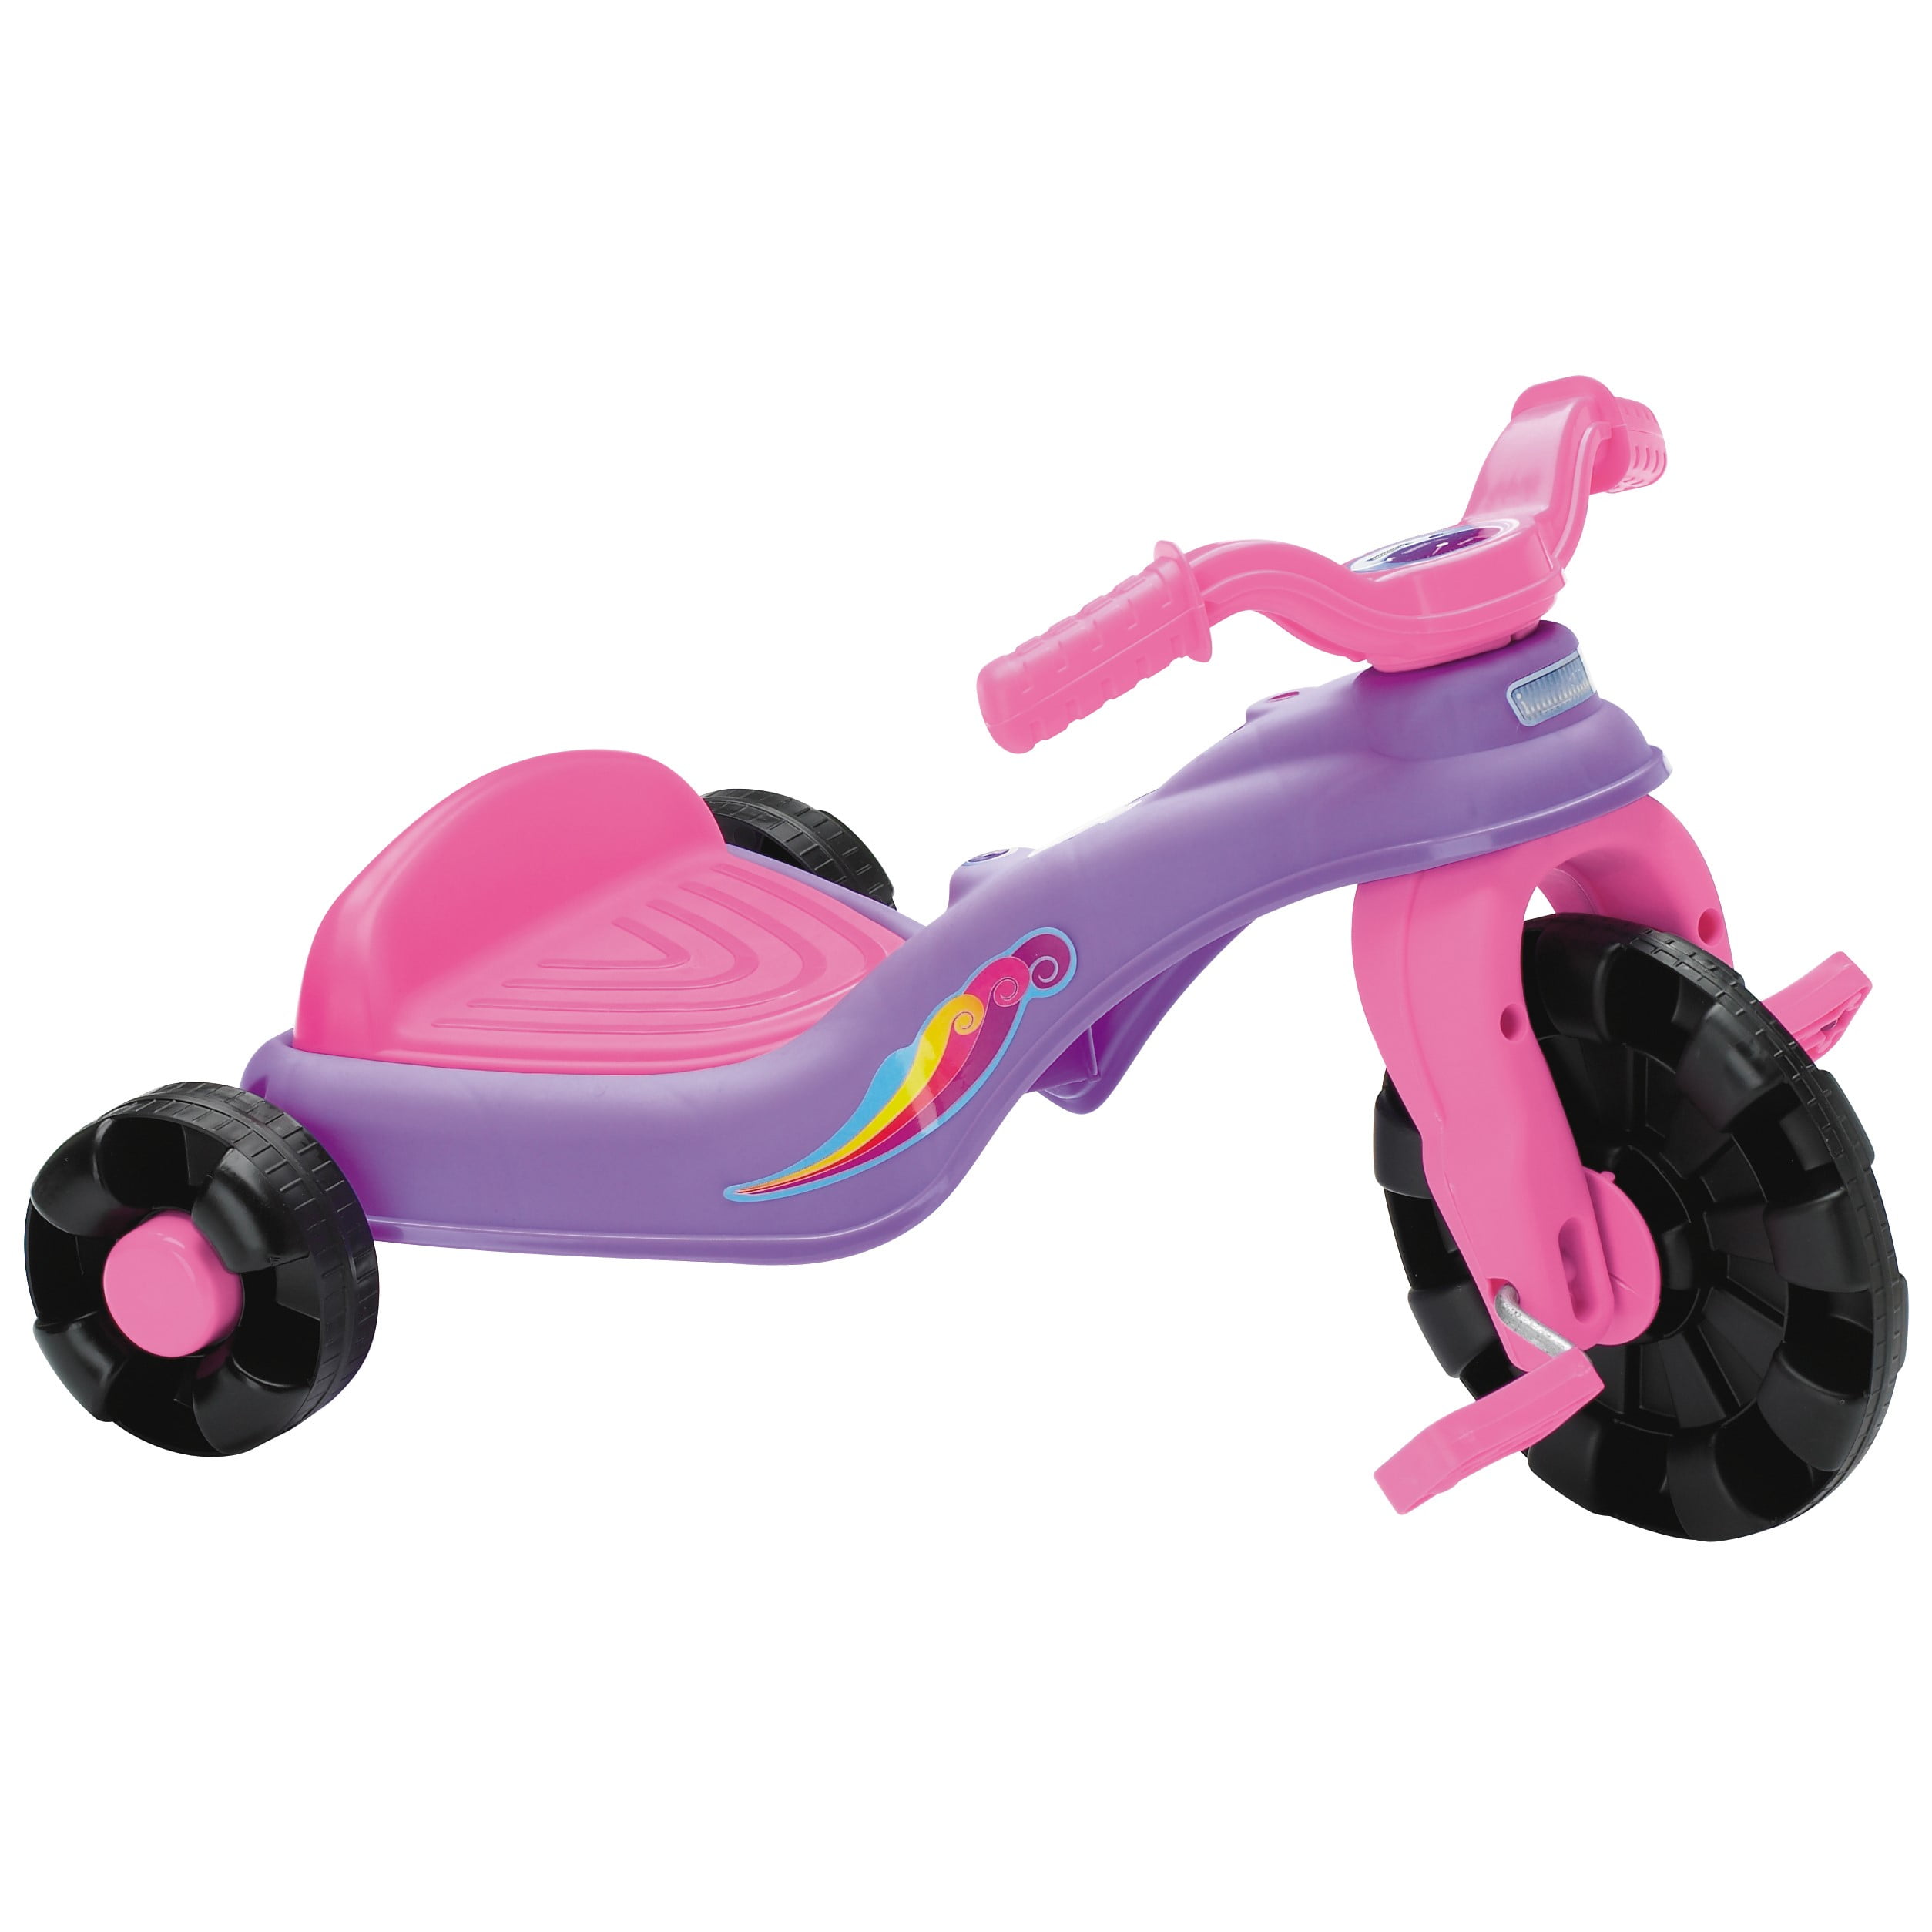 Details about   Minnie Mouse 10" Fly Wheels Junior Cruiser Ride-on Ages 2-4 5.6... Pink/White 